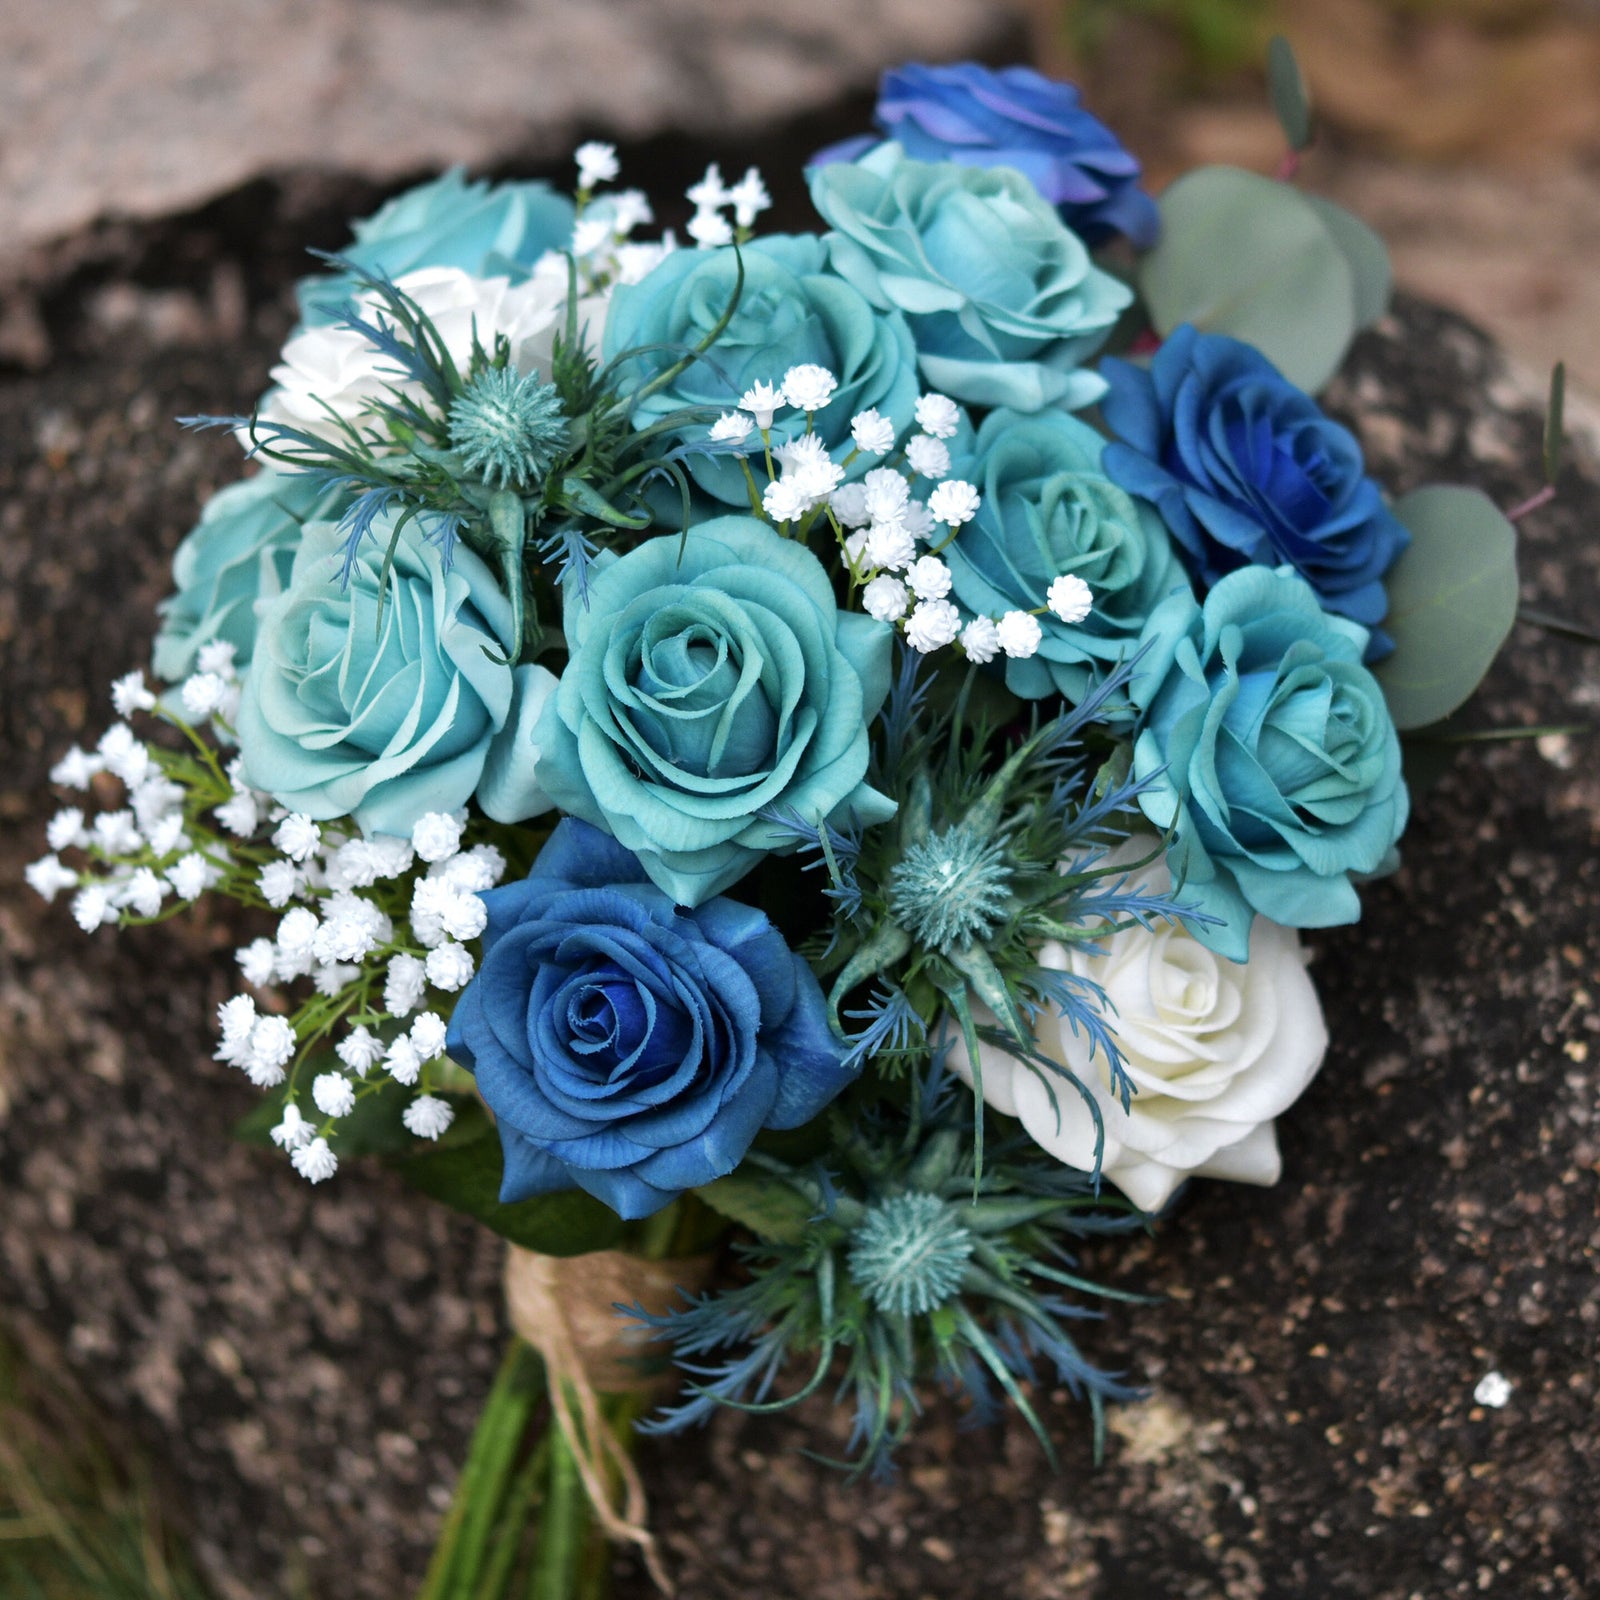 28 PCS DIY Set (POSH BLUE) Real Touch Mix Blue Roses Sea Holly Thistle Artificial Flowers Arrangement Silk Bouquet for Gift Home Wedding Bridal Corporate Gifts